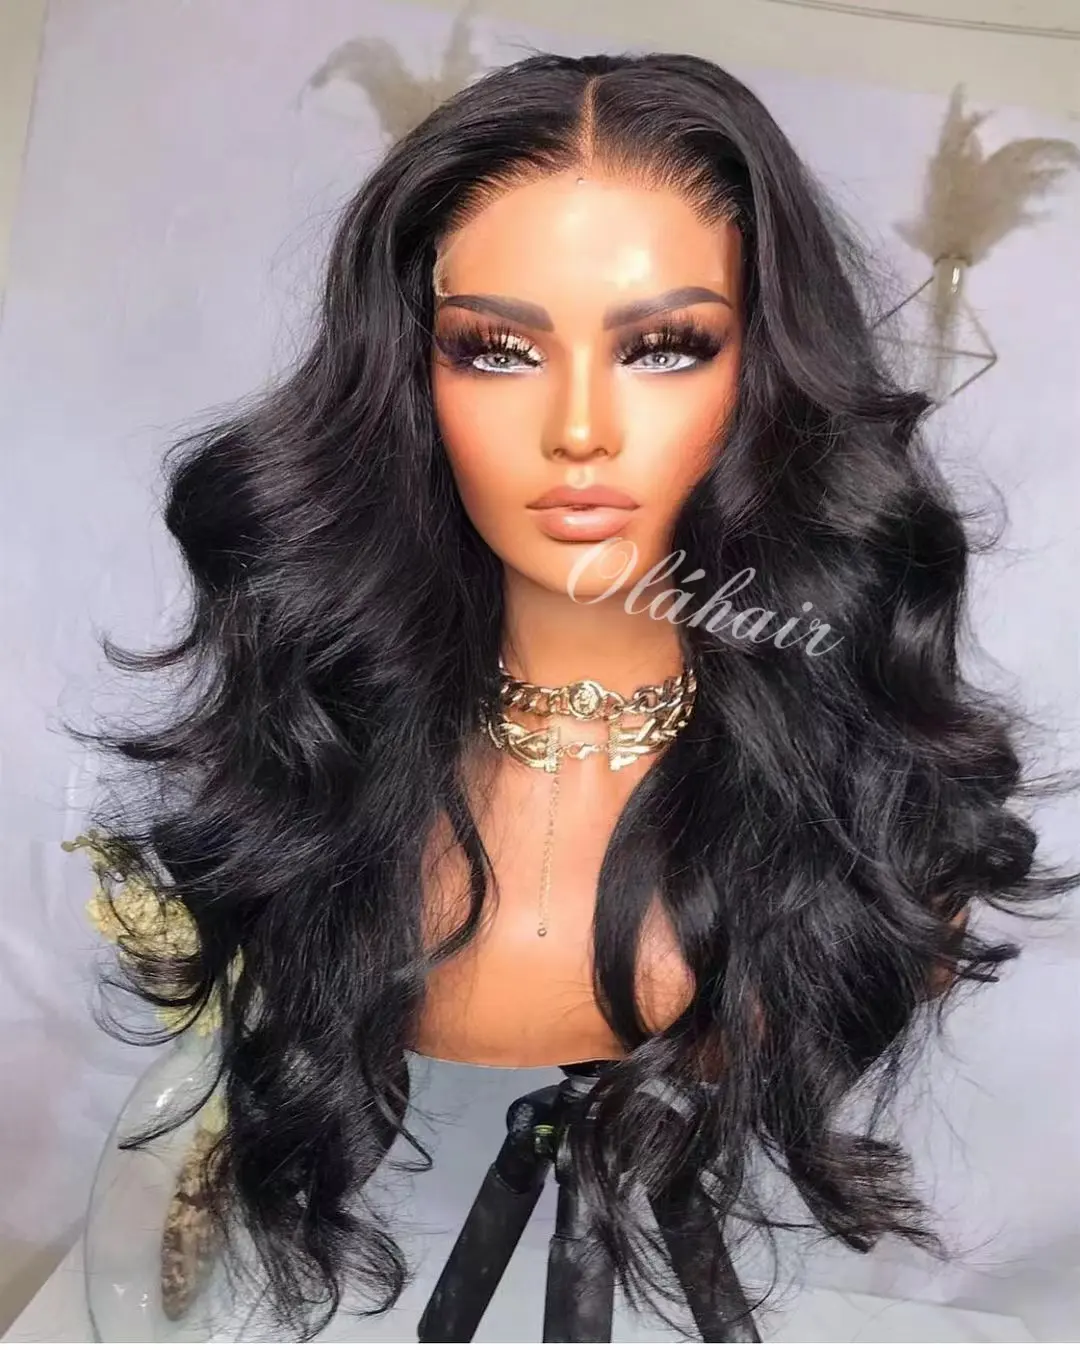 olahair 200% Density Factory Wholesale Body Wave Lace Frontal Wig Brazilian Virgin Human Hair Lace Front Wigs